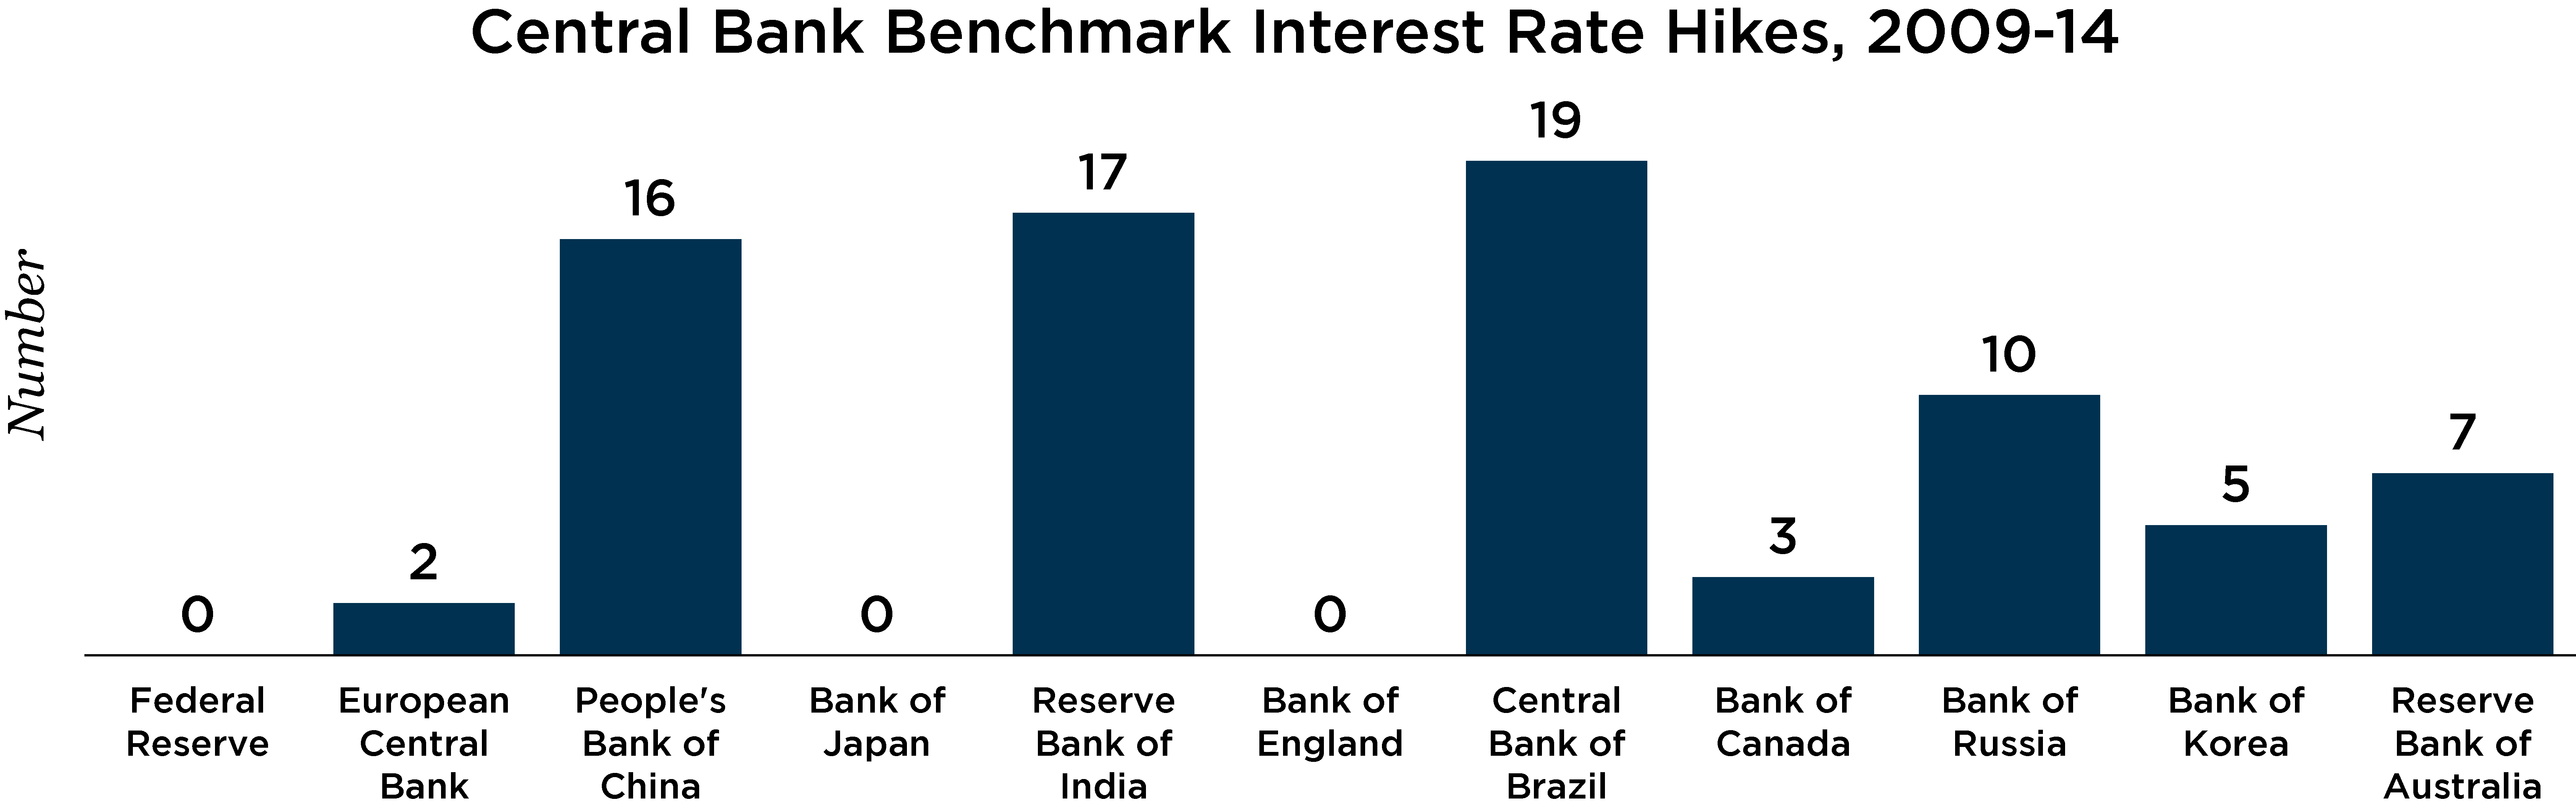 chart depicting central bank benchmark interest rate hikes from 2009 - 2014